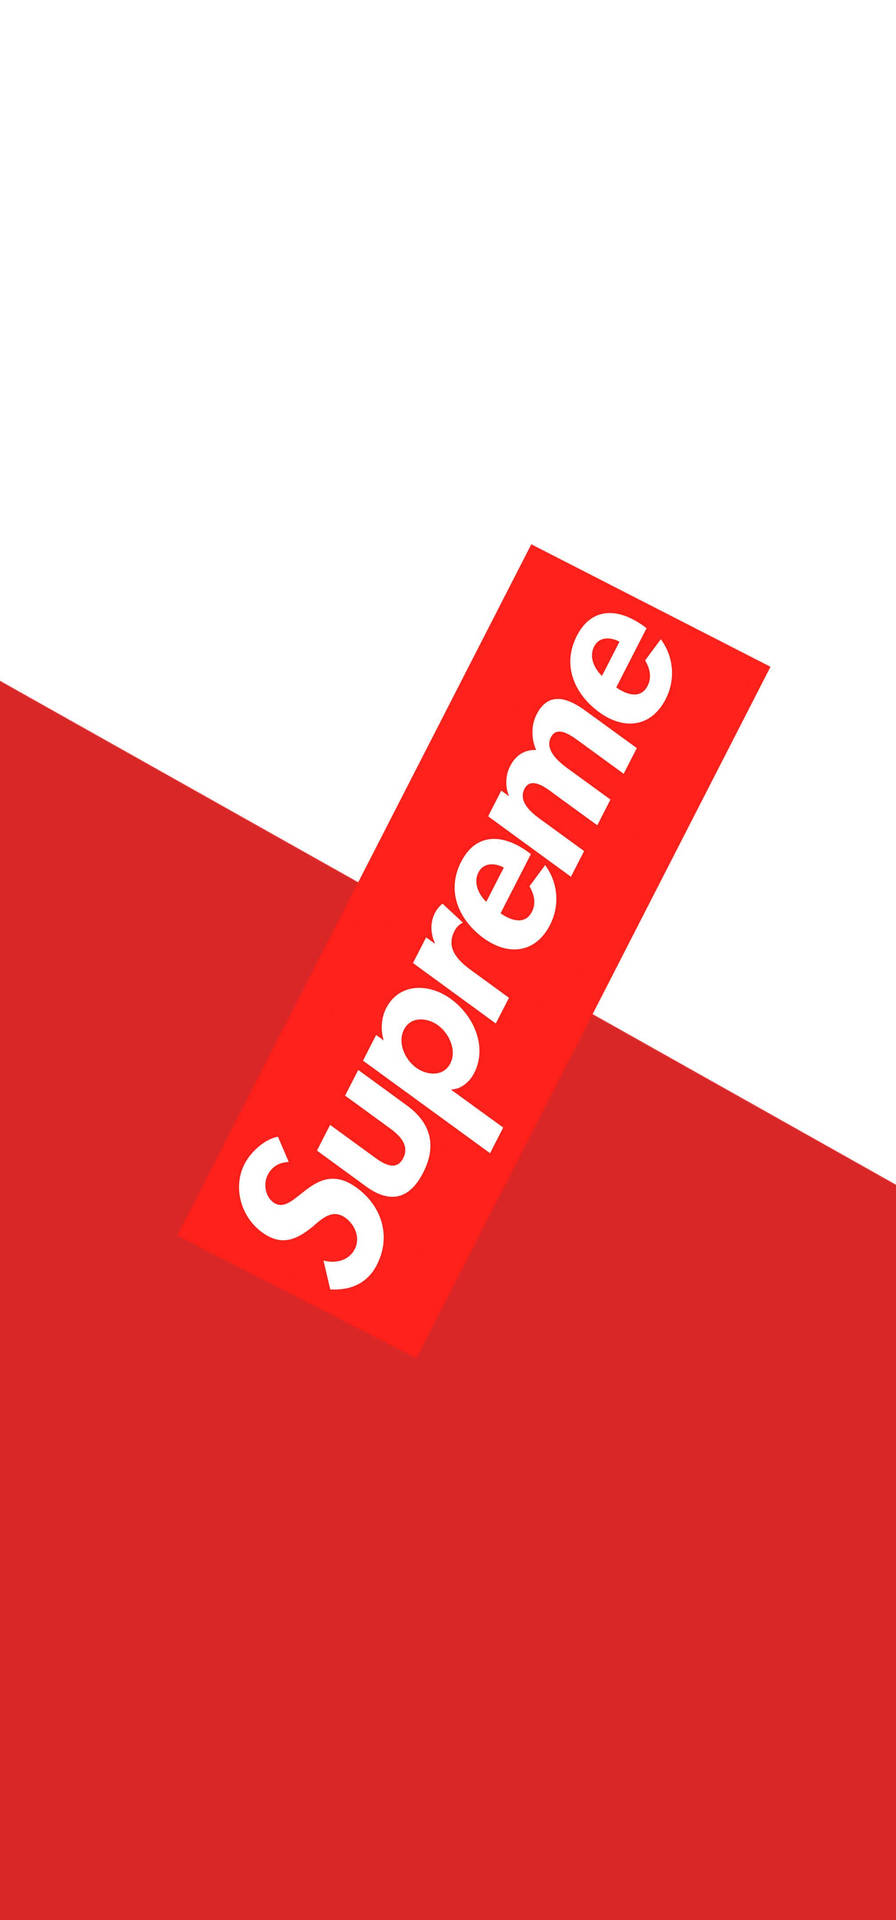 Download White And Red Supreme Split Wallpaper | Wallpapers.com